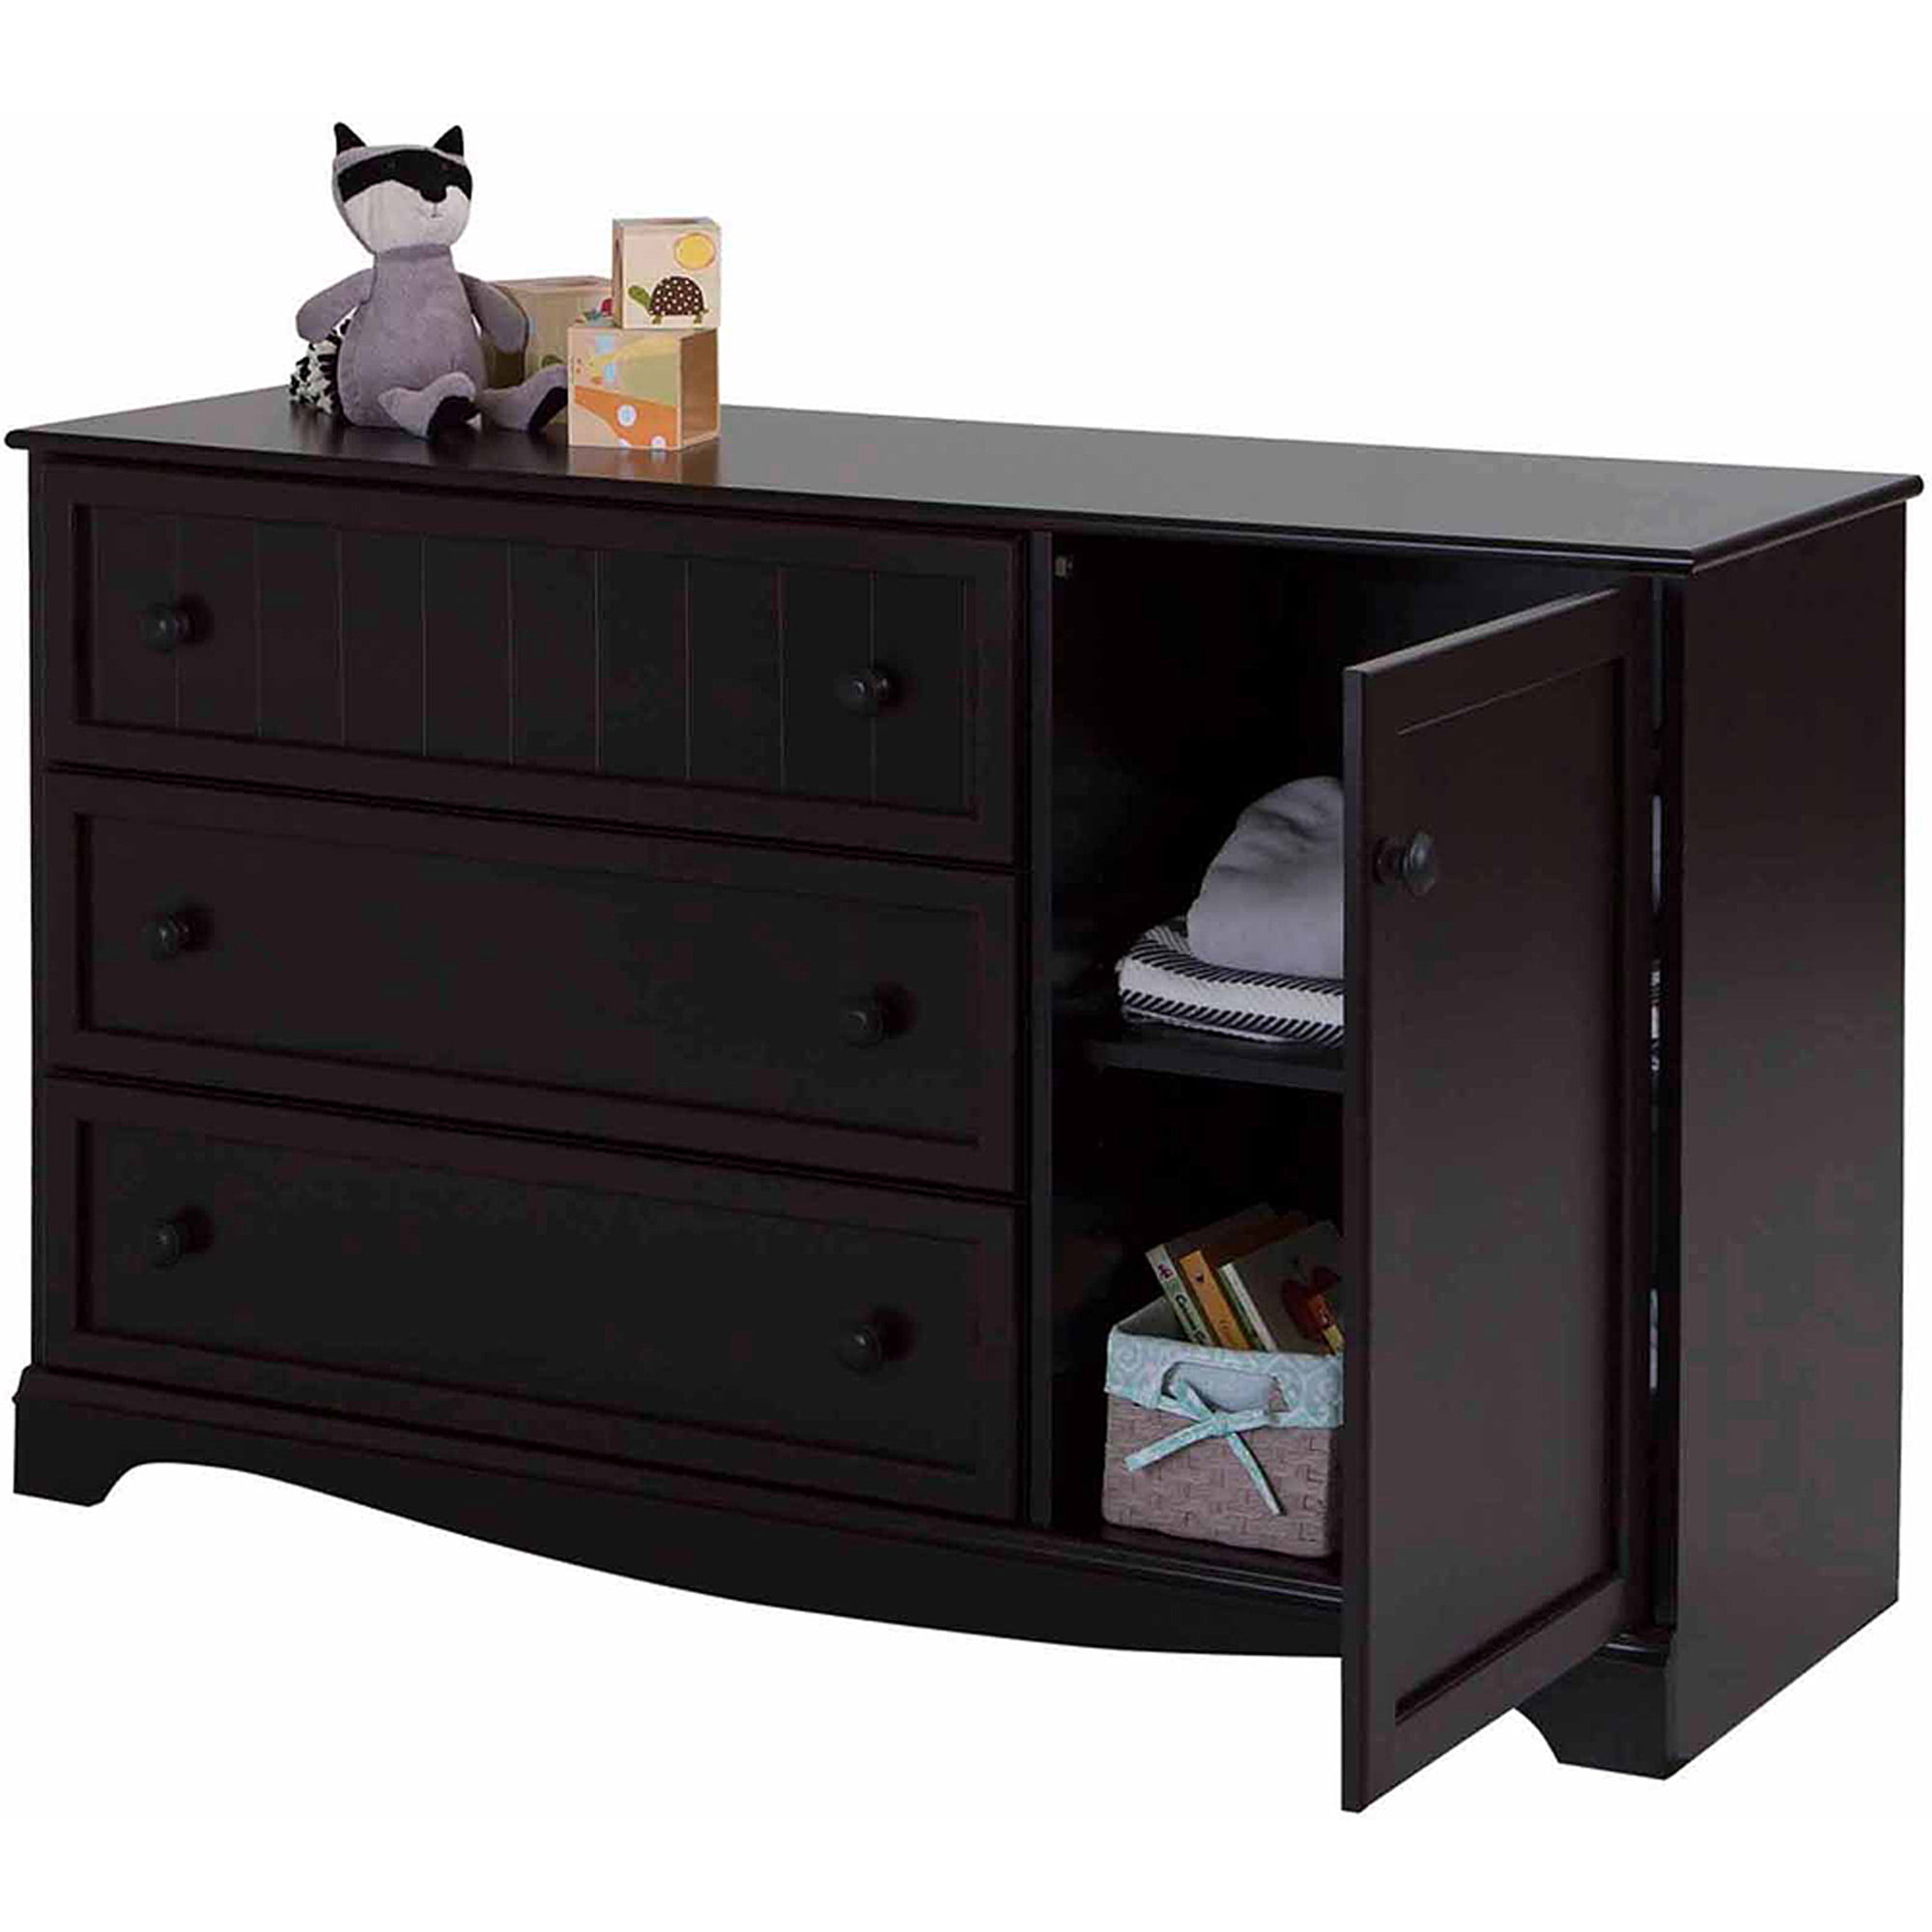 South Shore Savannah 3 Drawer Dresser With Door Multiple Finishes